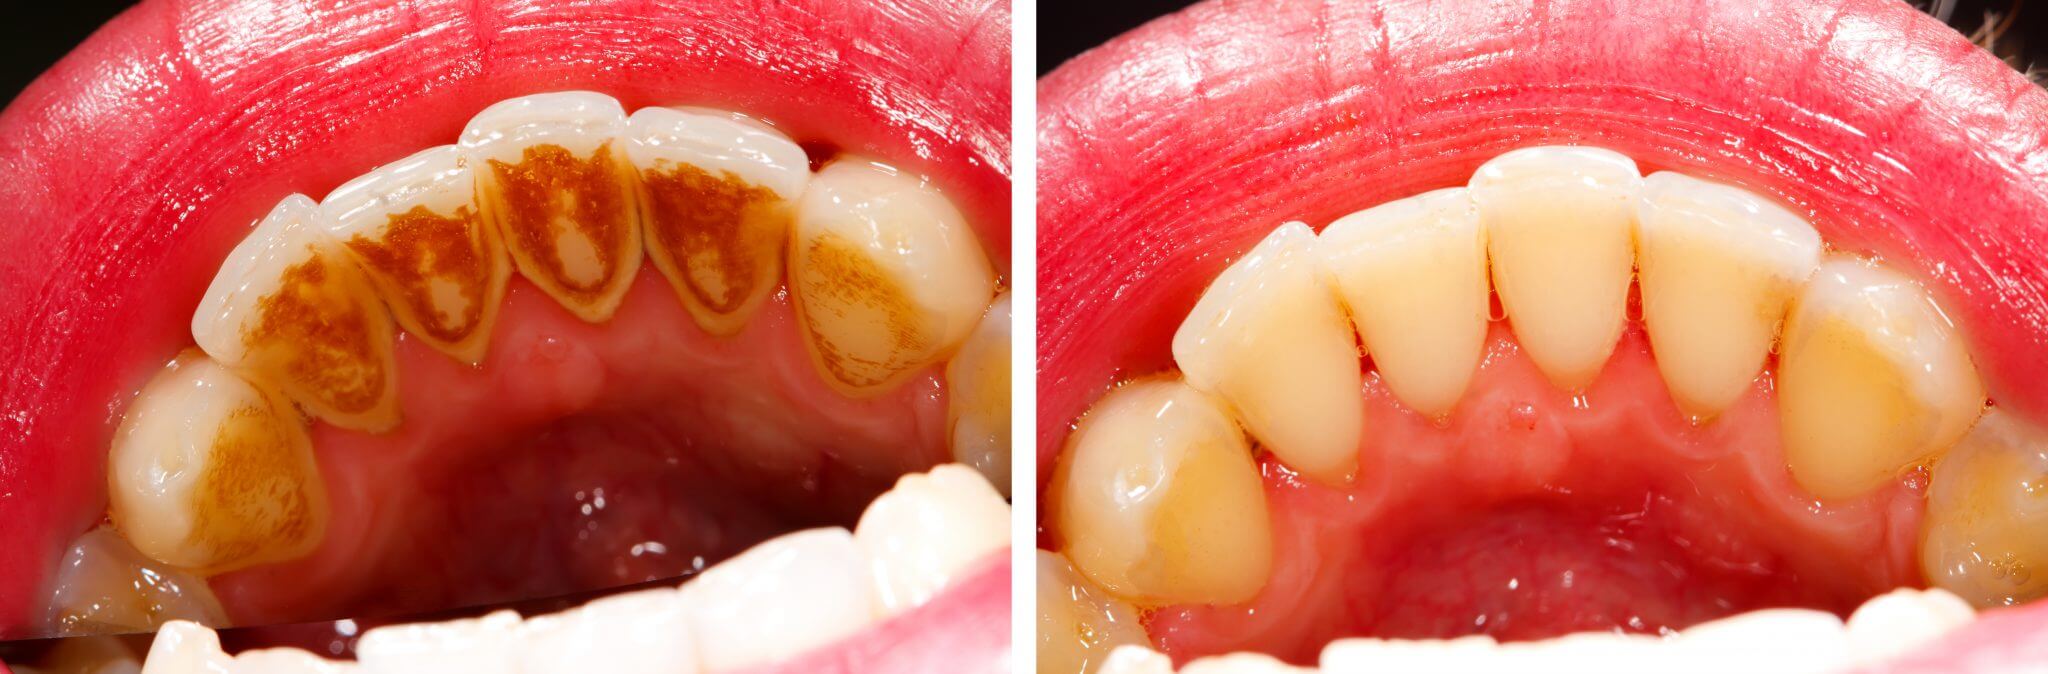 gum infection and periodontitis treatment